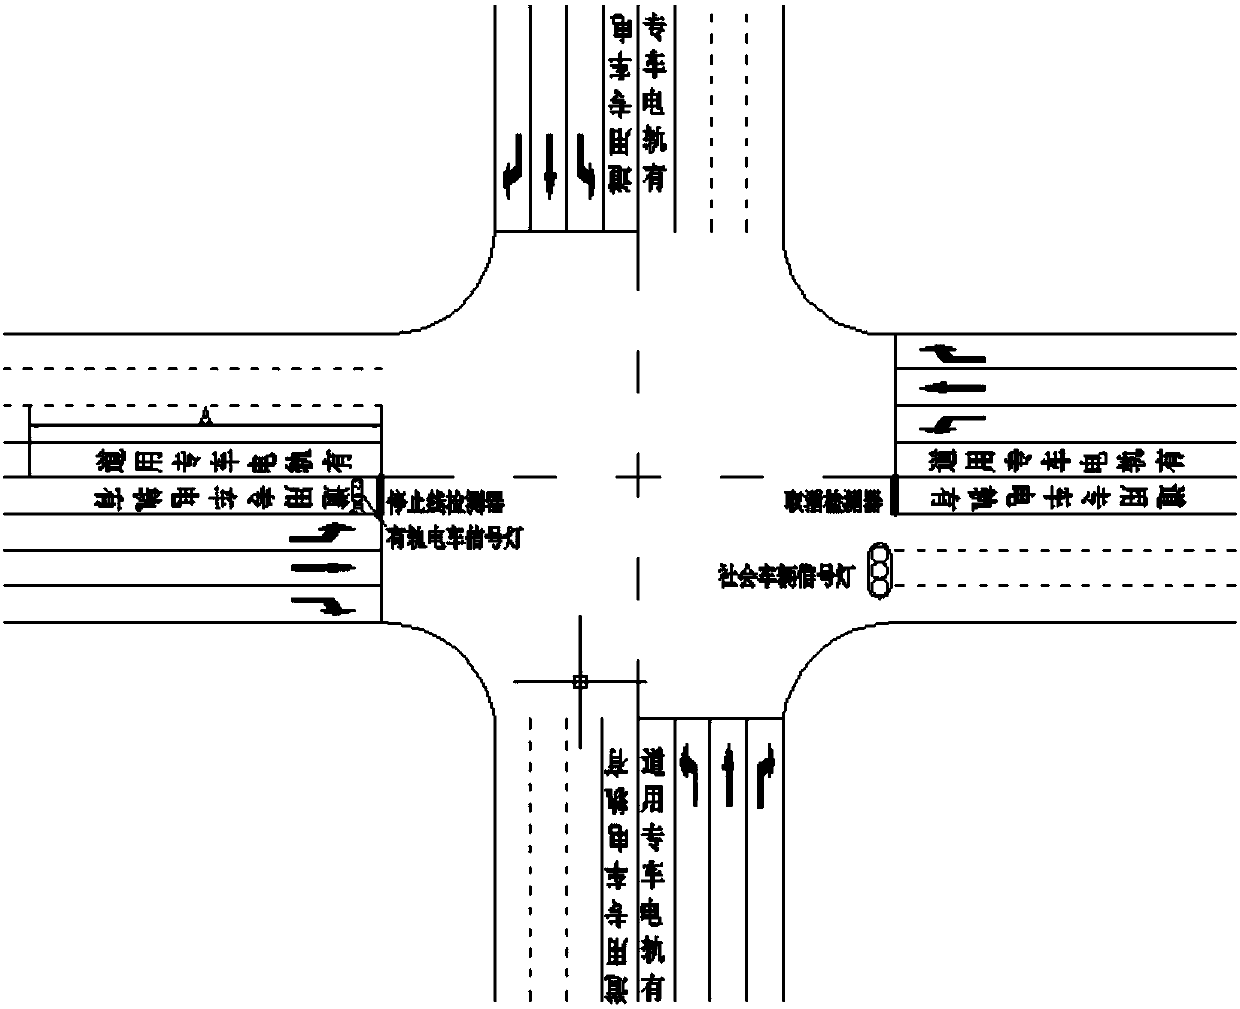 A Cooperative Control Method for Tram Intersections Considering the Stopping Time of Stations